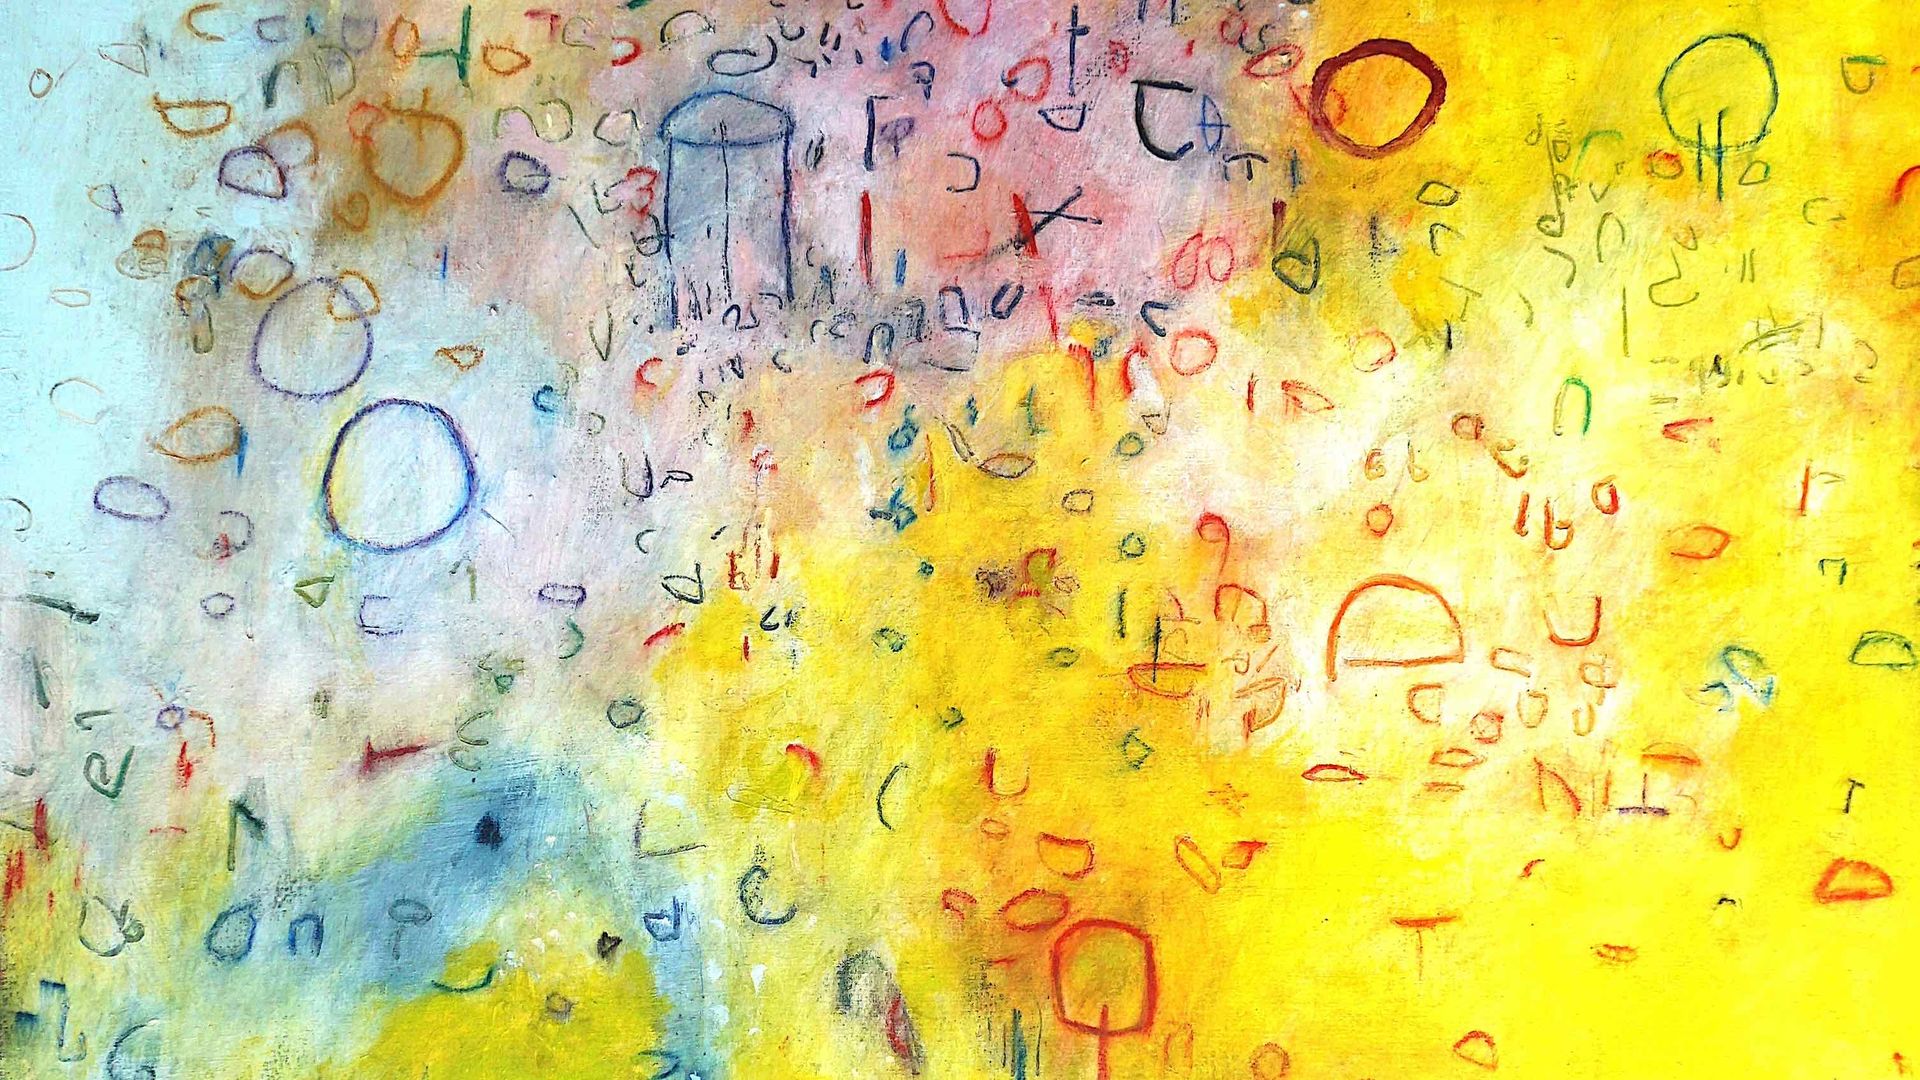 A yellow and blue abstract painting with circles and dashes